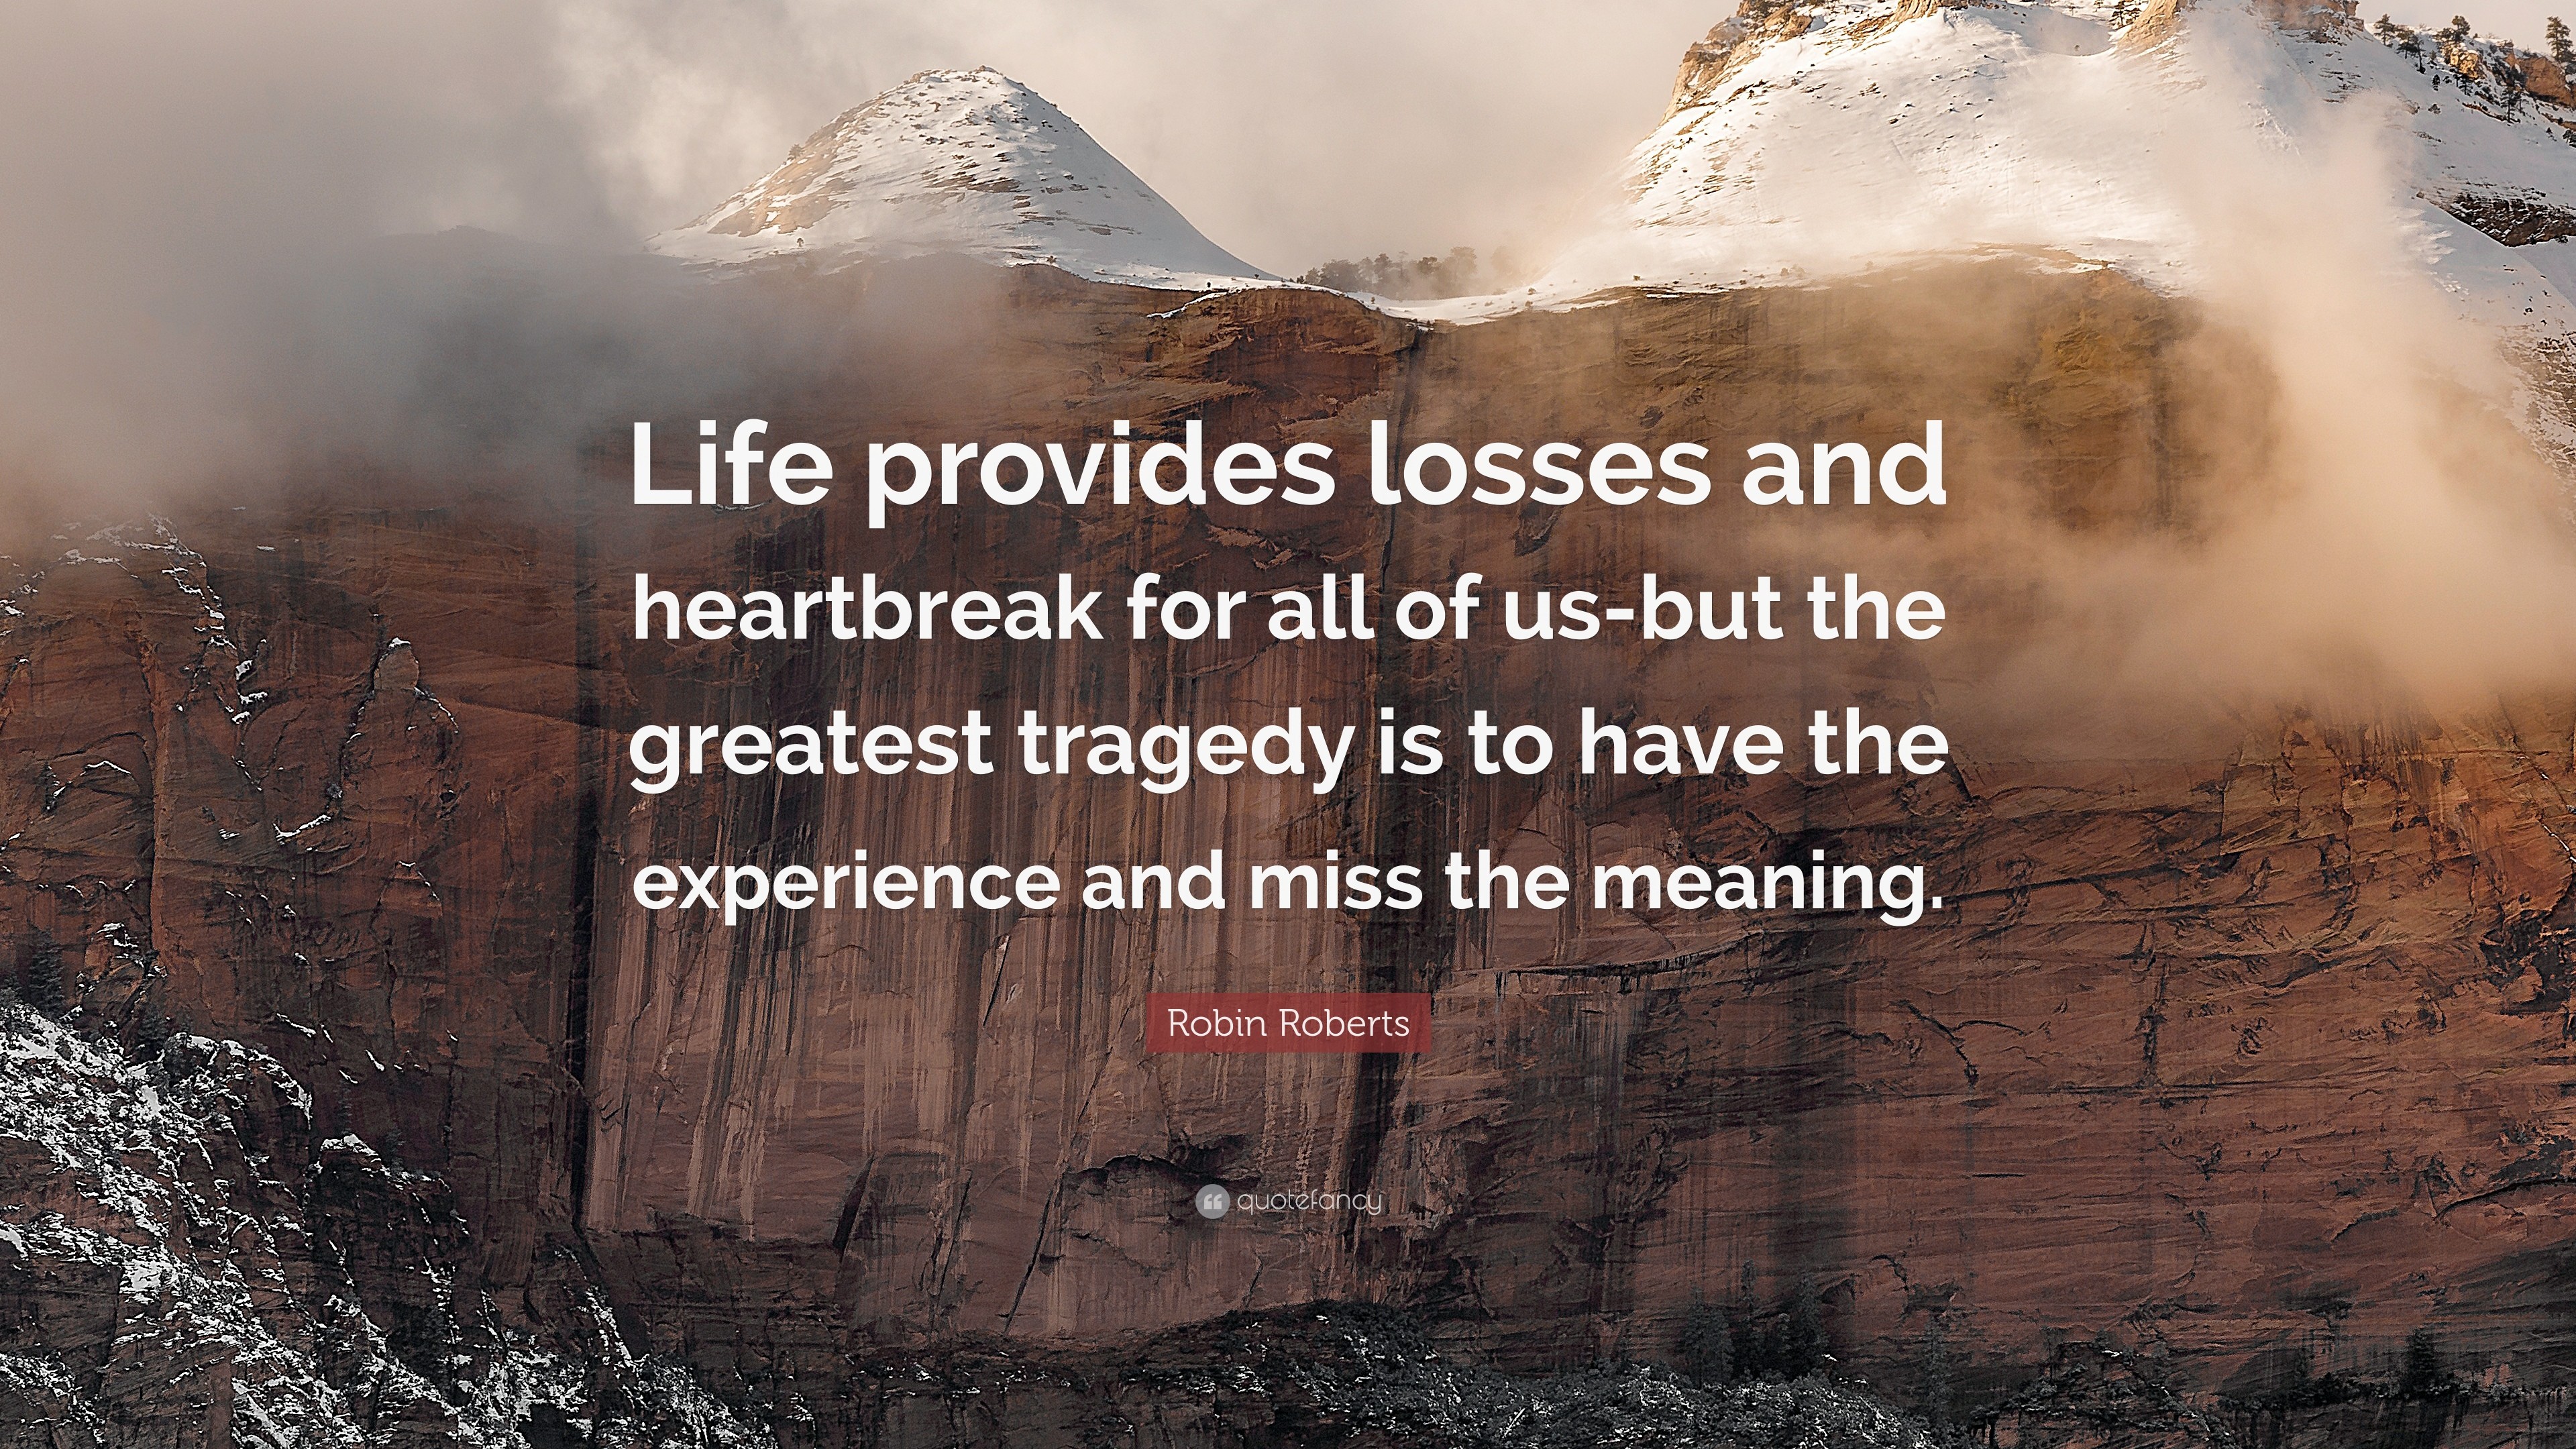 3840x2160 Robin Roberts Quote: “Life provides losses and heartbreak for all of us-but